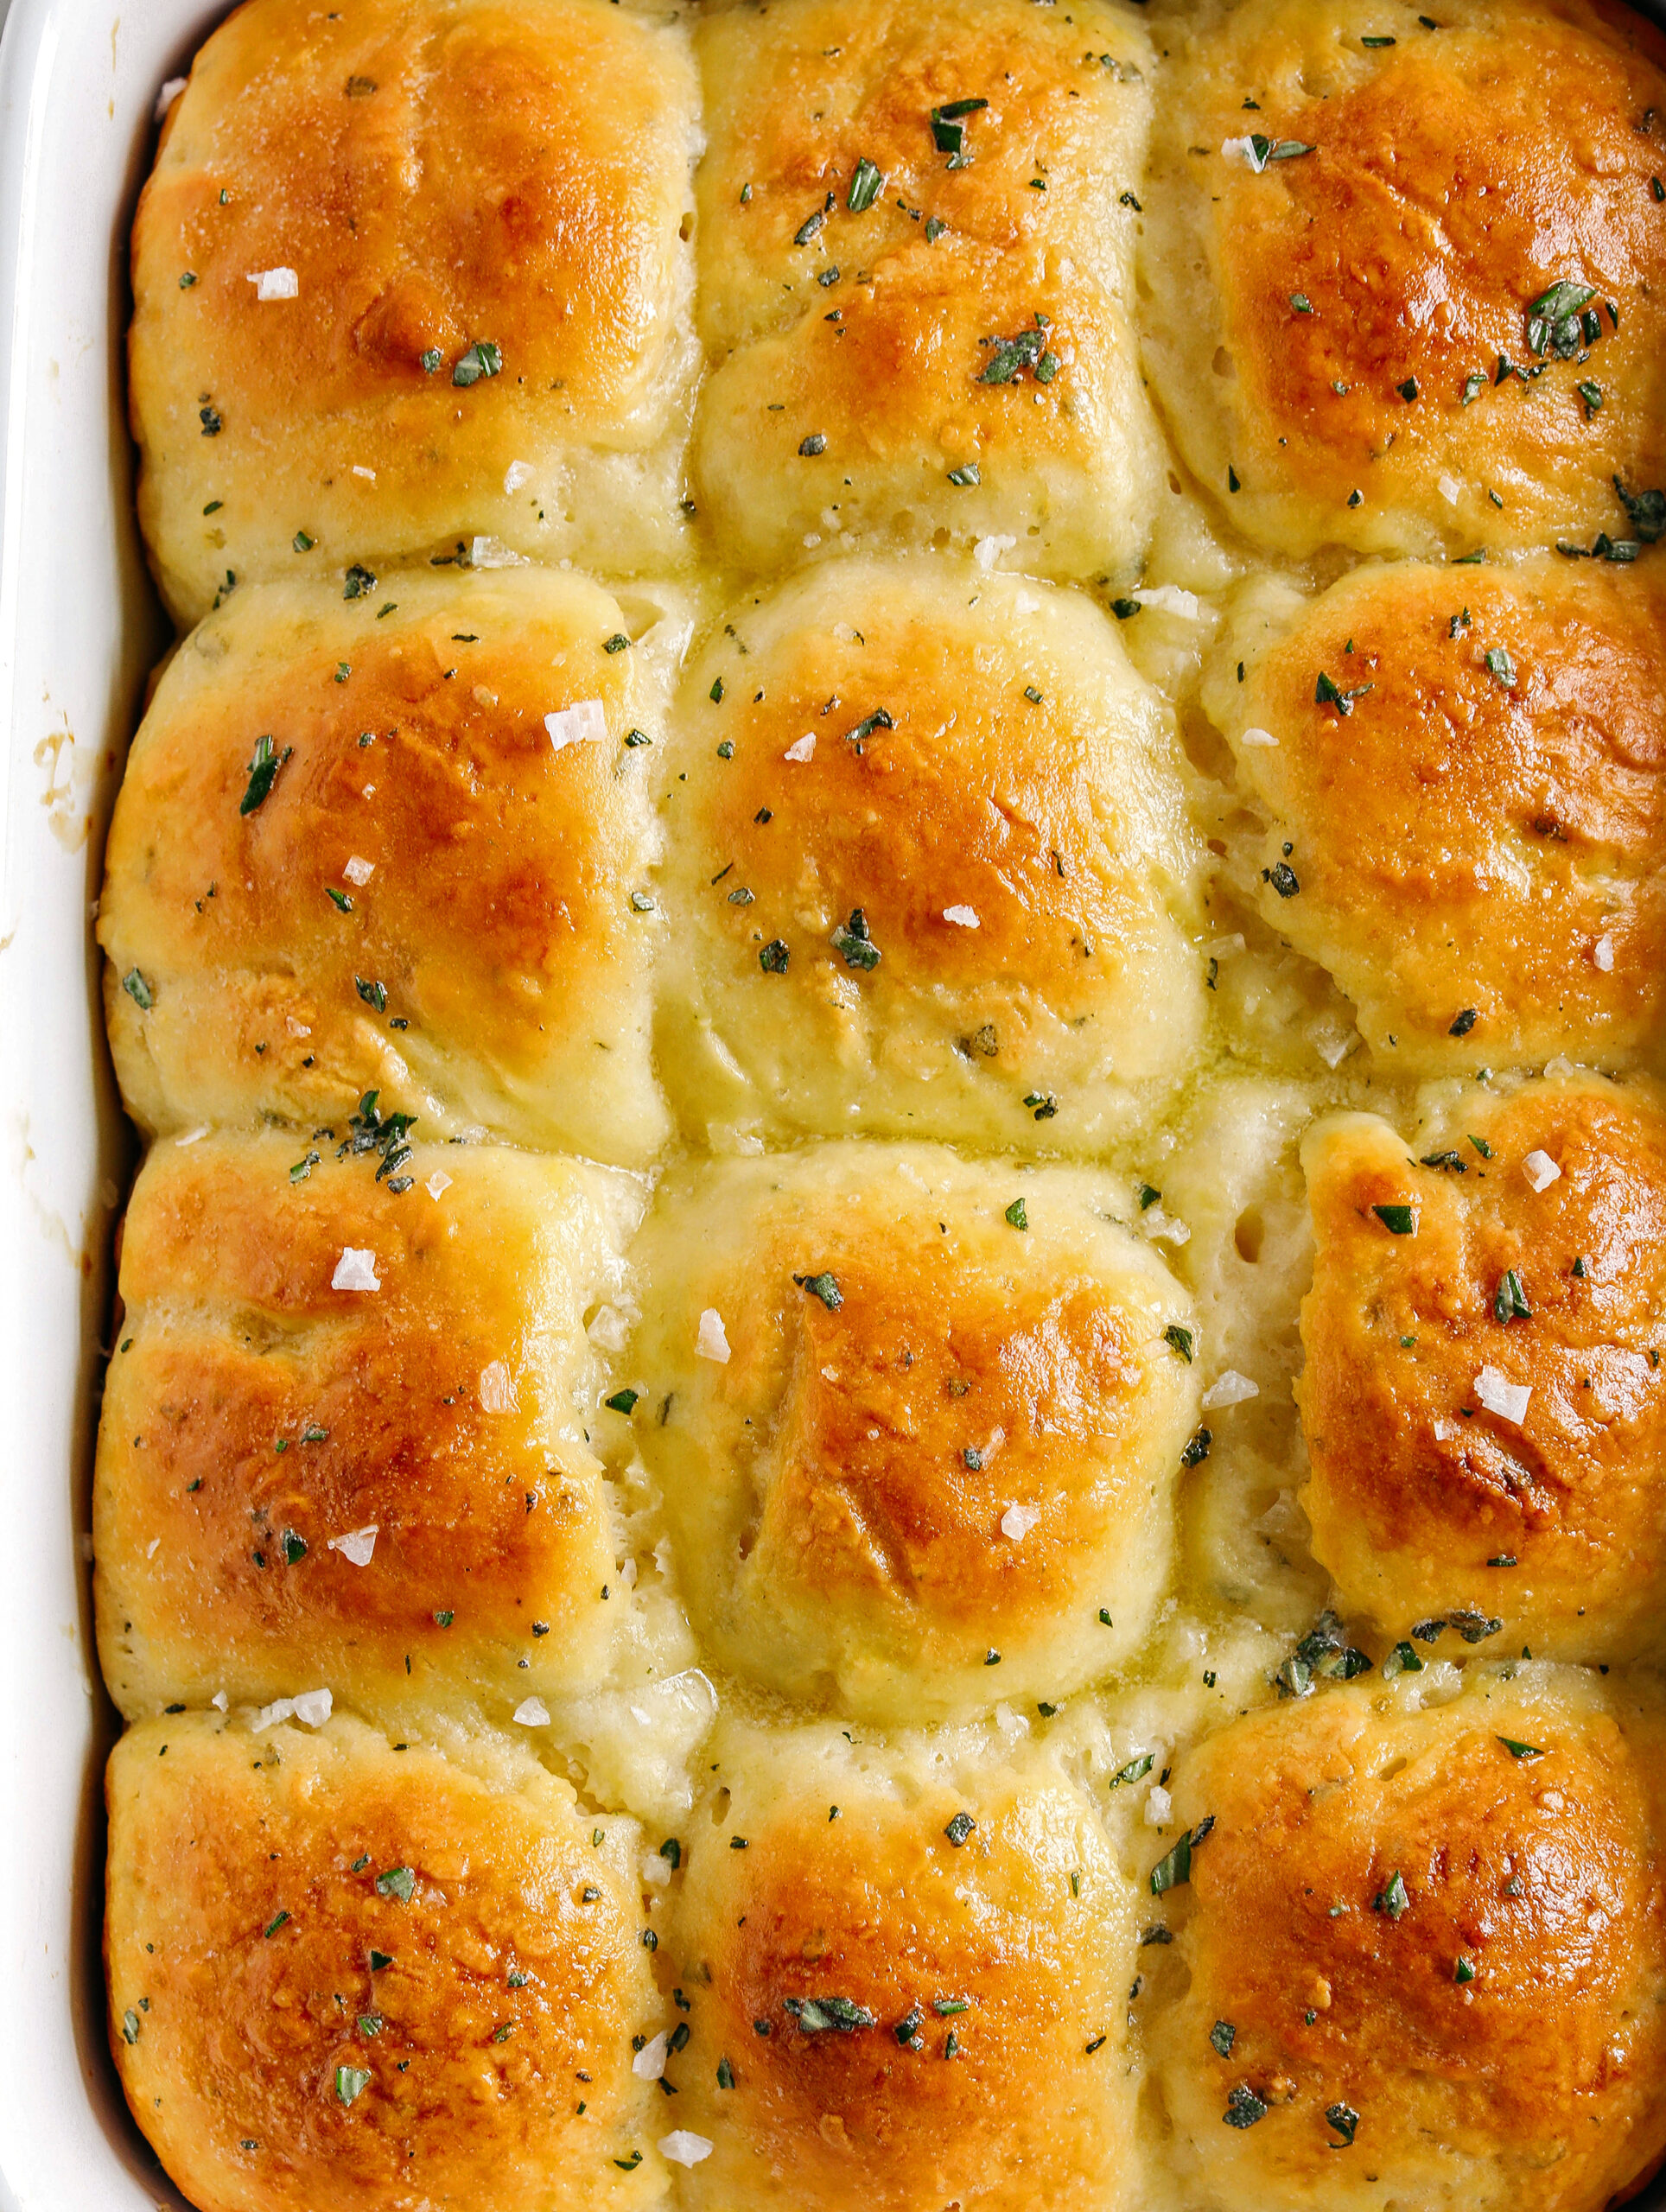 These pull-apart Honey Butter Dinner Rolls are light, fluffy and made without any yeast, eggs or oil.  Infused with honey and fresh herbs, these Parker House-style dinner rolls are perfect for your holiday table this season!